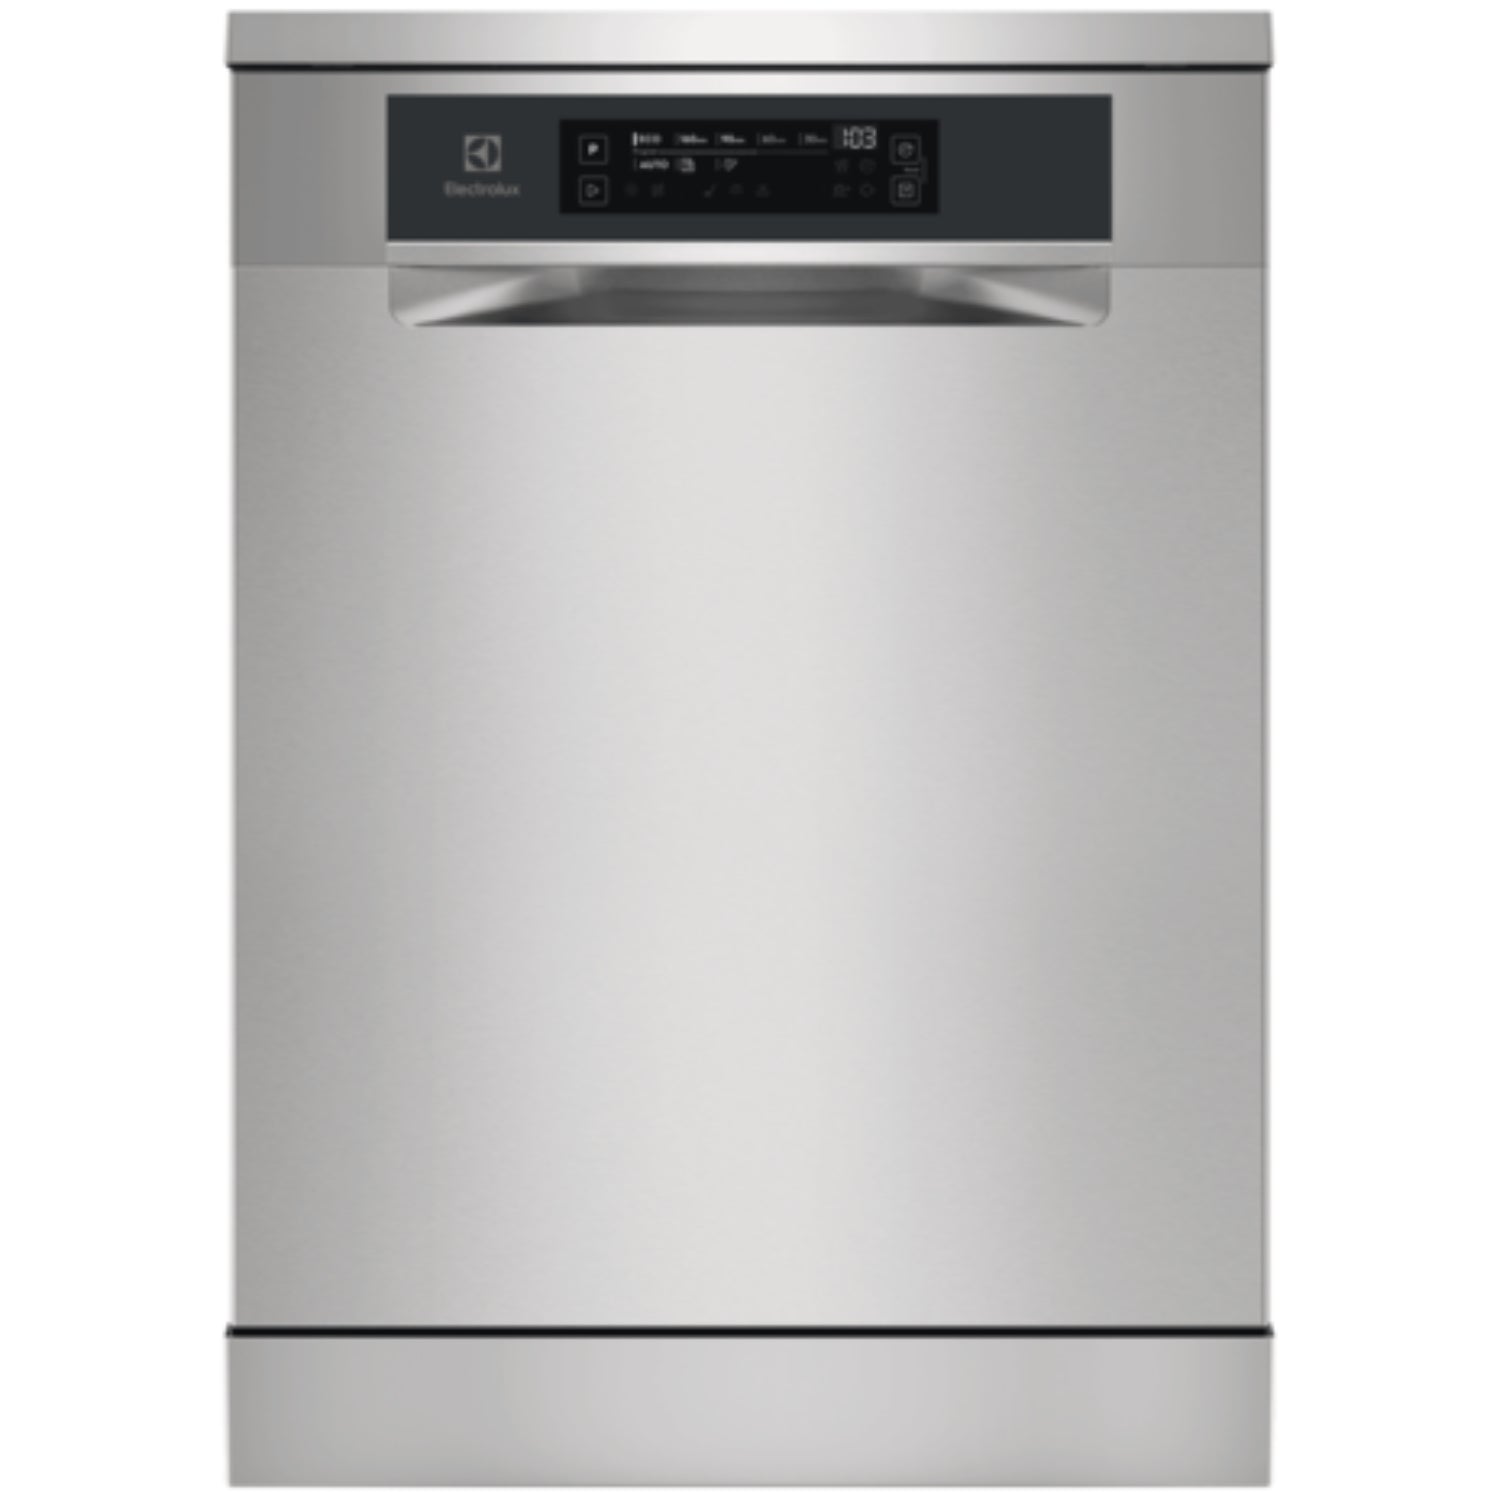 Electrolux 60cm Freestanding Dishwasher with 13 Place Settings, Adaptable Drawer Space, GlassCare Program, High Pressure Water Jets, Stainless Steel